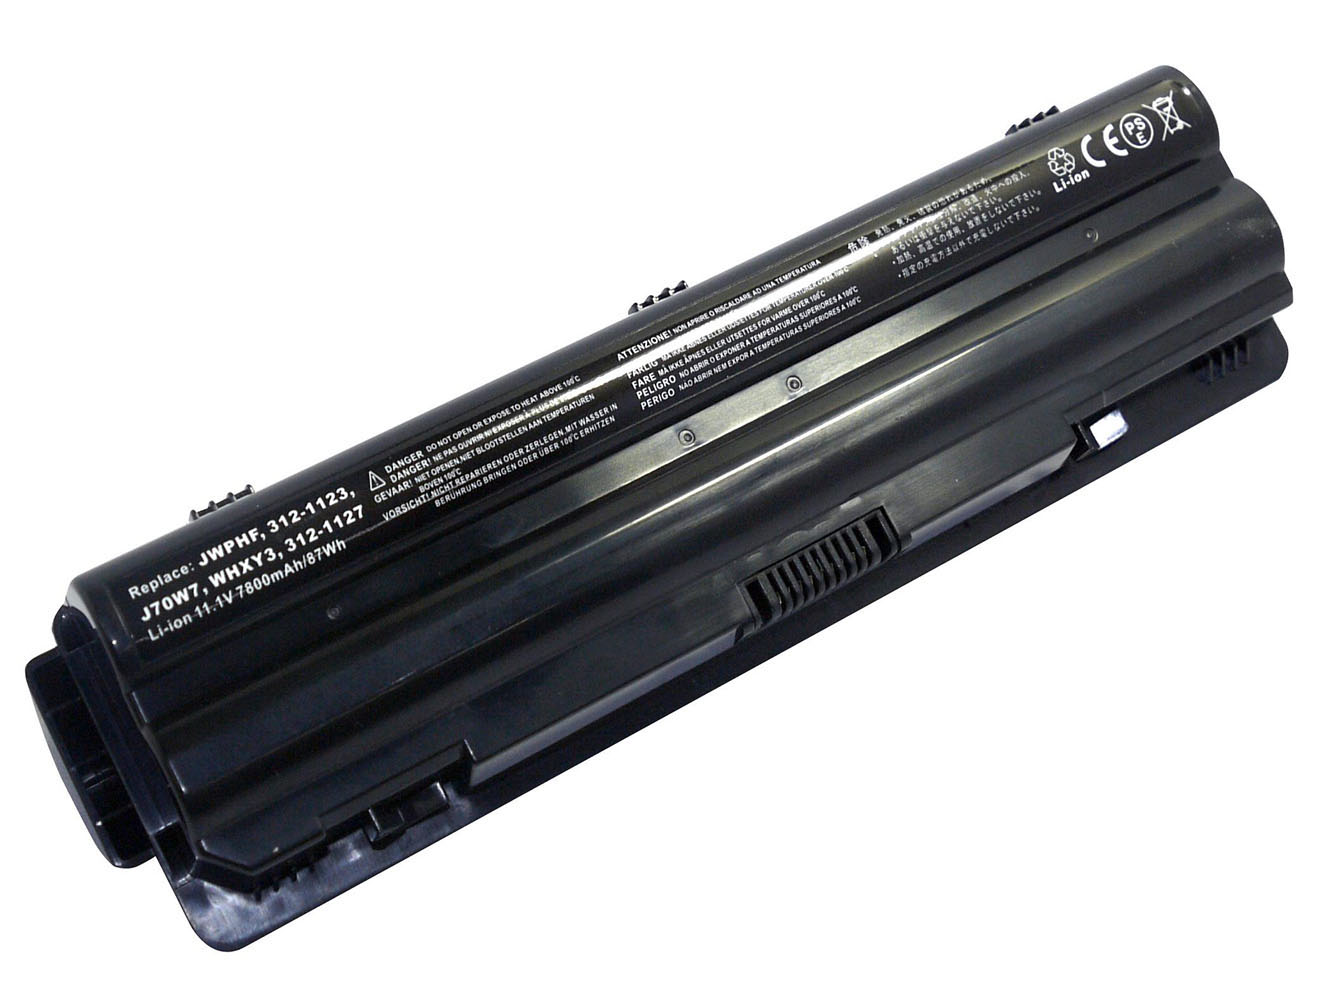 312-1123, J70W7 replacement Laptop Battery for Dell XPS 14, XPS 14 (L401X), 9 cells, 7800mAh, 11.10V